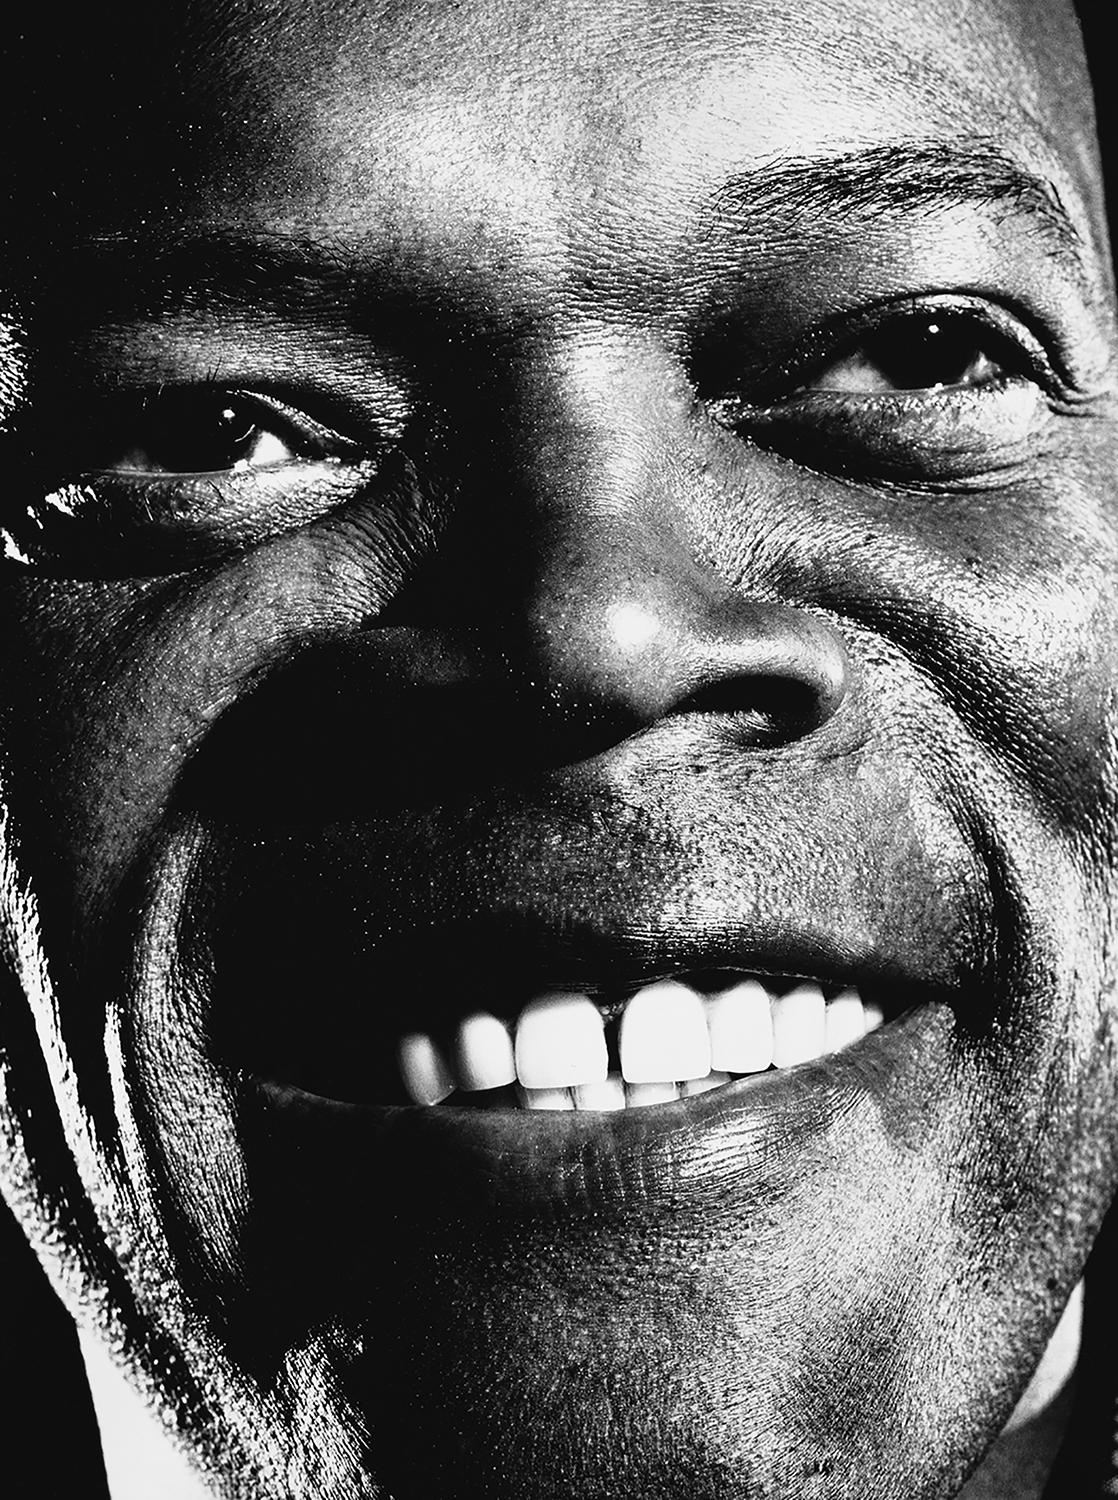 Samuel L Jackson by Nigel Parry
Nigel Parry began his photographic career in London in 1988 and moved to New York City in 1994. Since then, he has been commissioned by the most distinguished publications, advertising agencies, entertainment,